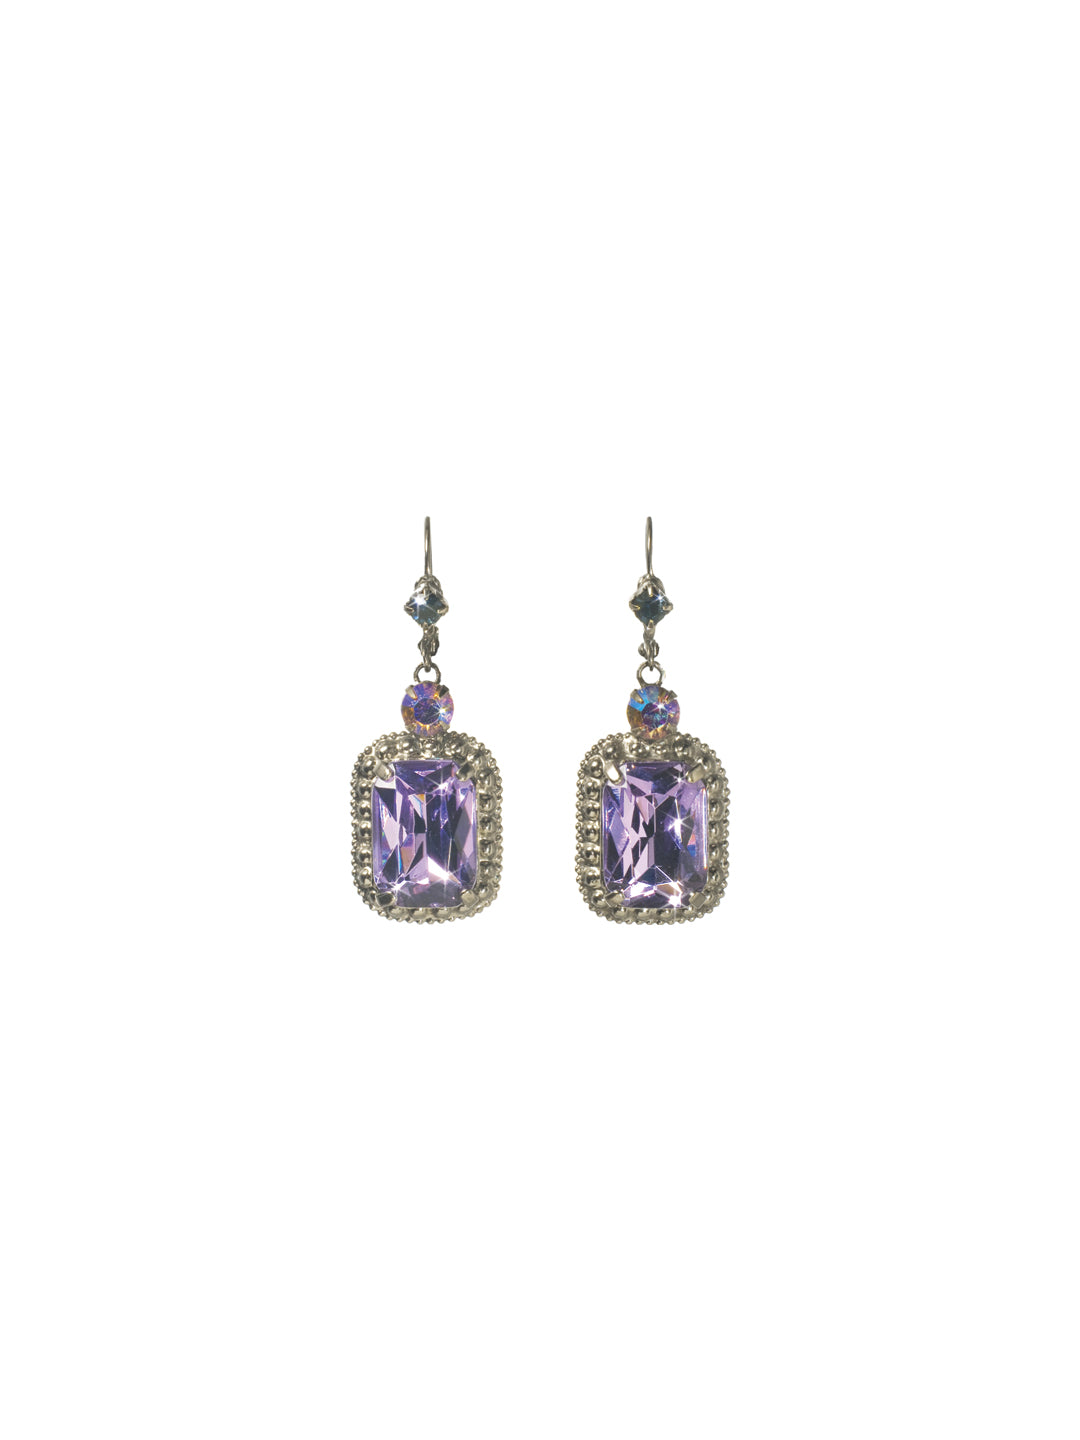 Emerald Cut Deco Earring - ECK49ASHY -  From Sorrelli's Hydrangea collection in our Antique Silver-tone finish.